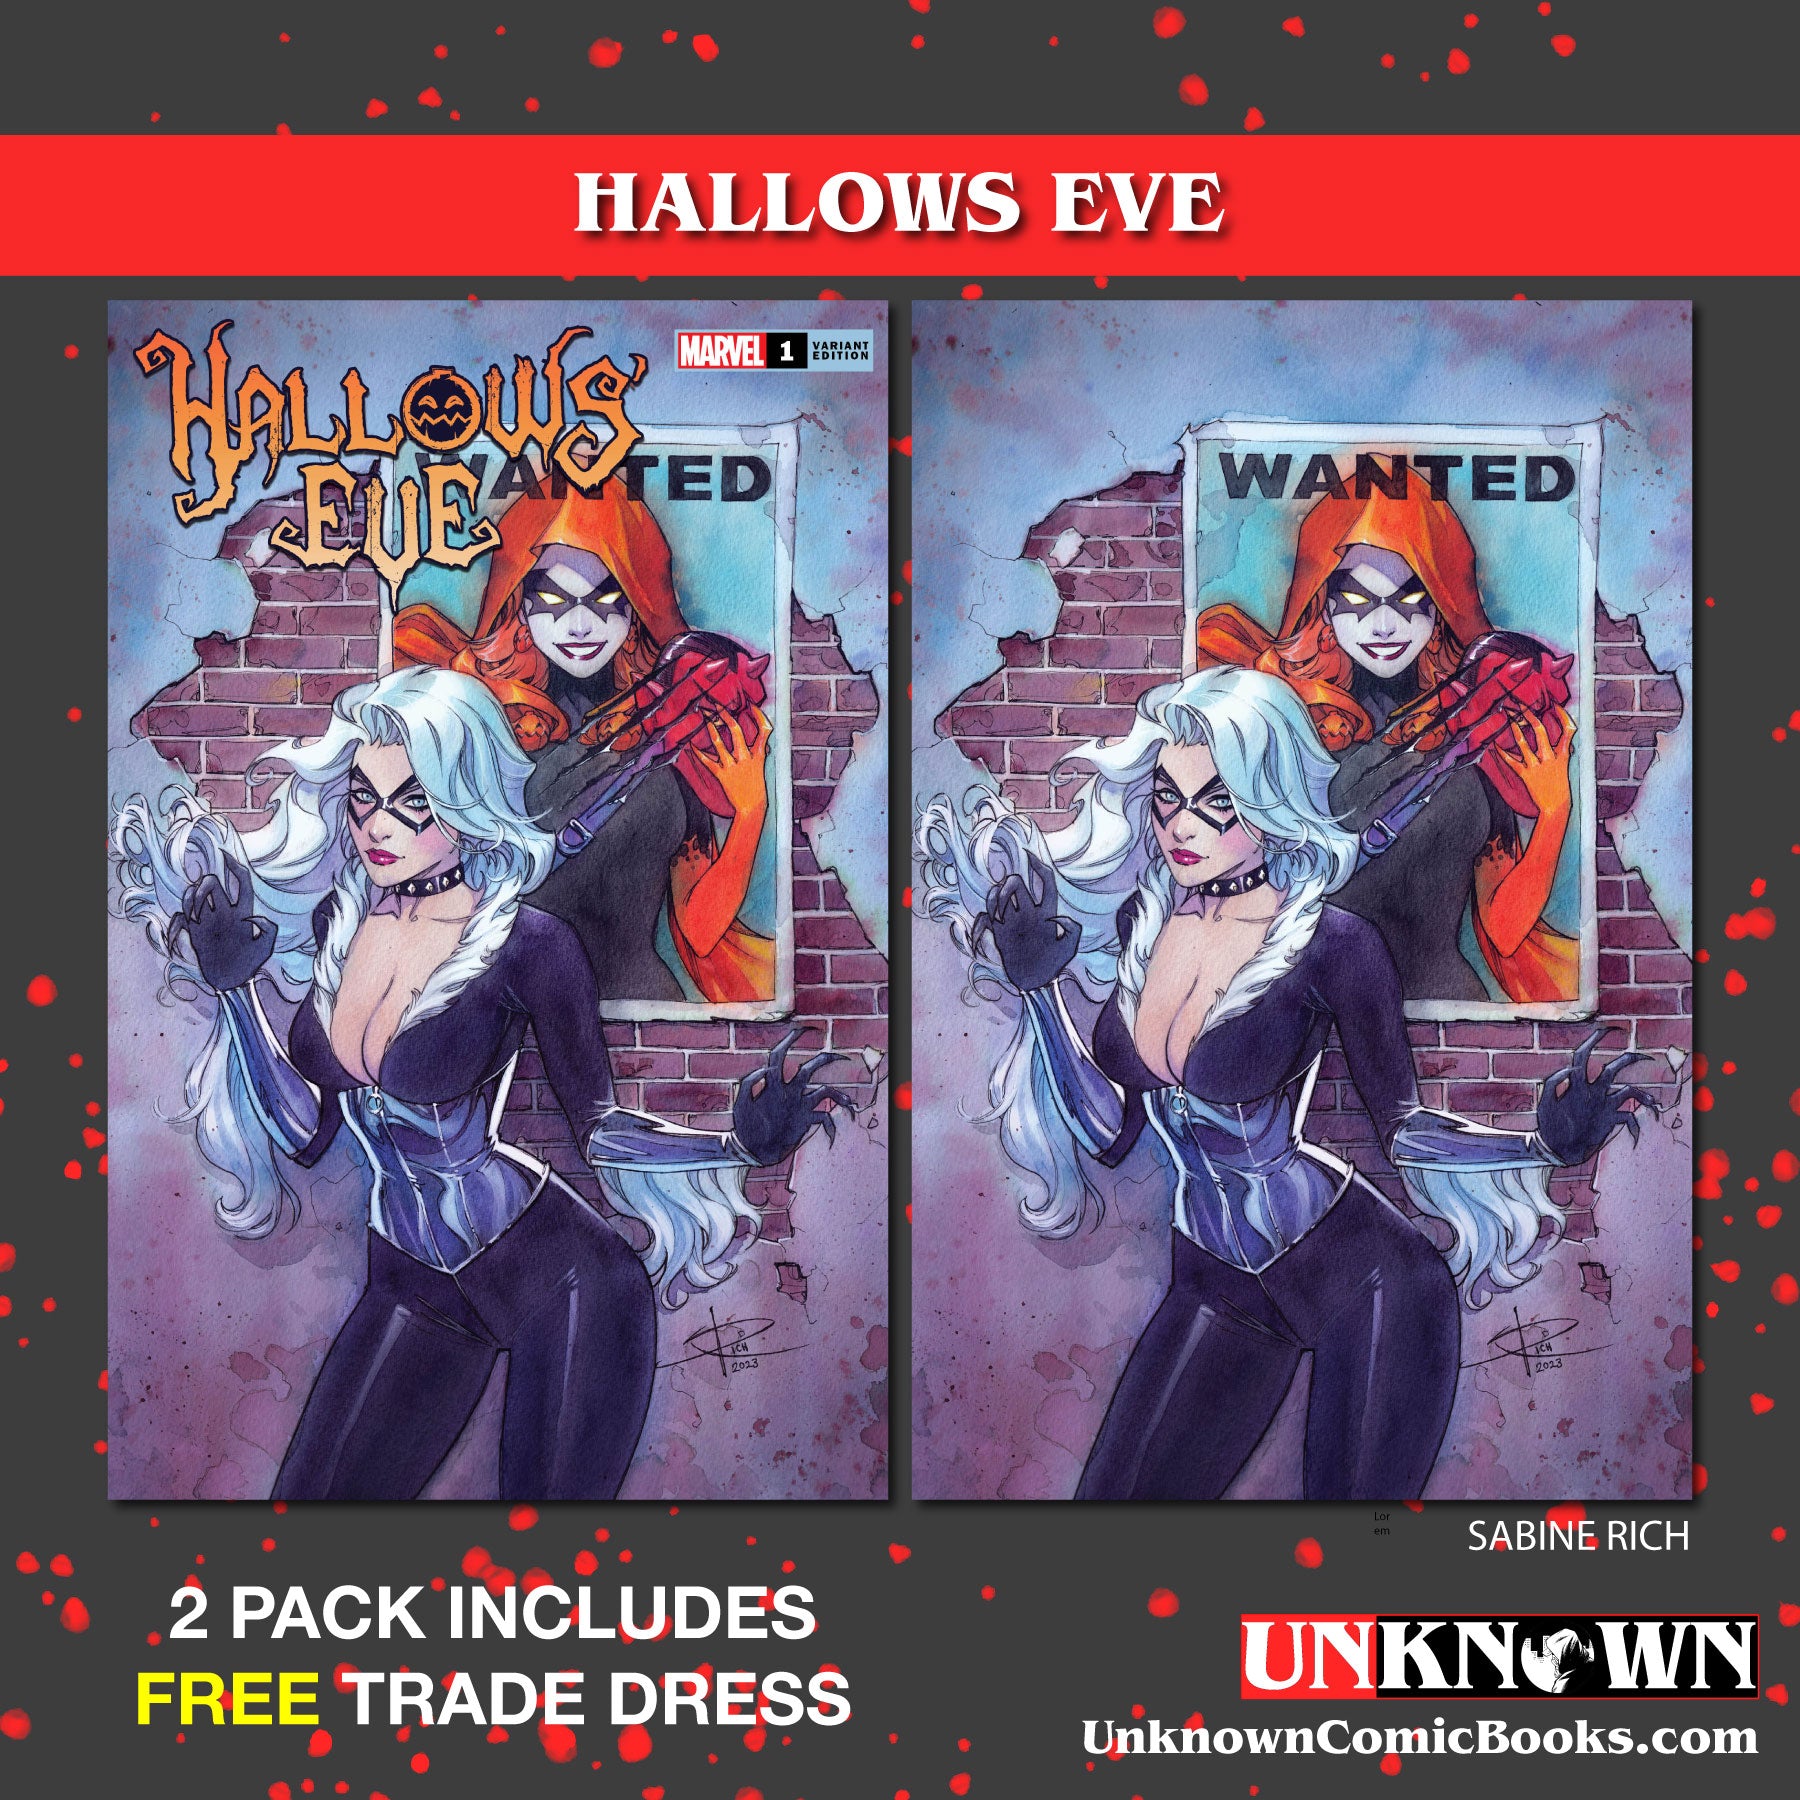 [2 PACK] **FREE TRADE DRESS** HALLOWS' EVE #1 UNKNOWN COMICS SABINE RICH EXCLUSIVE VAR (03/01/2023)